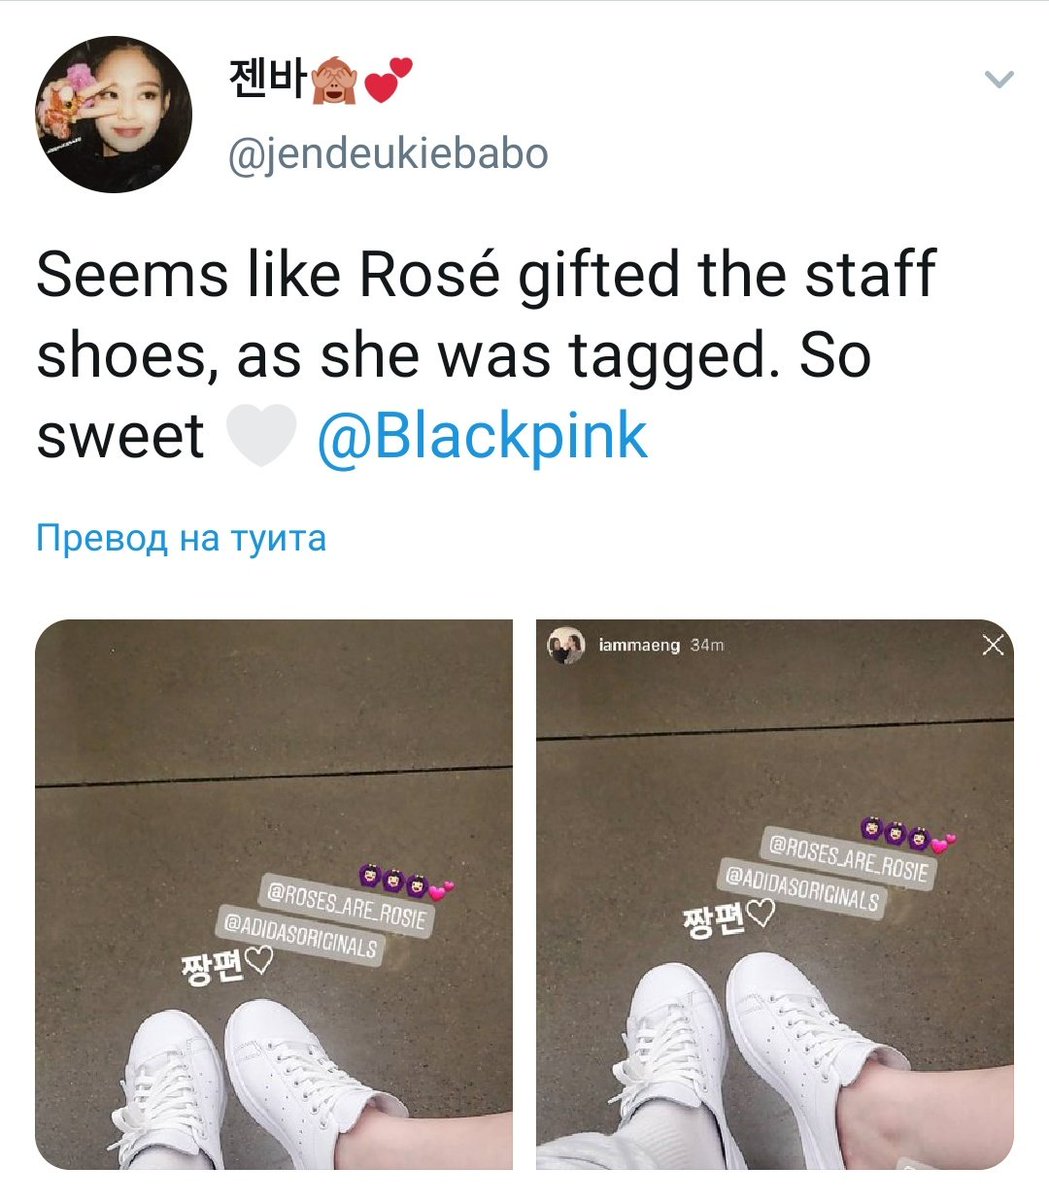  @BLACKPINK are constantly making gifts to their staff, menagers, friends, members and fans